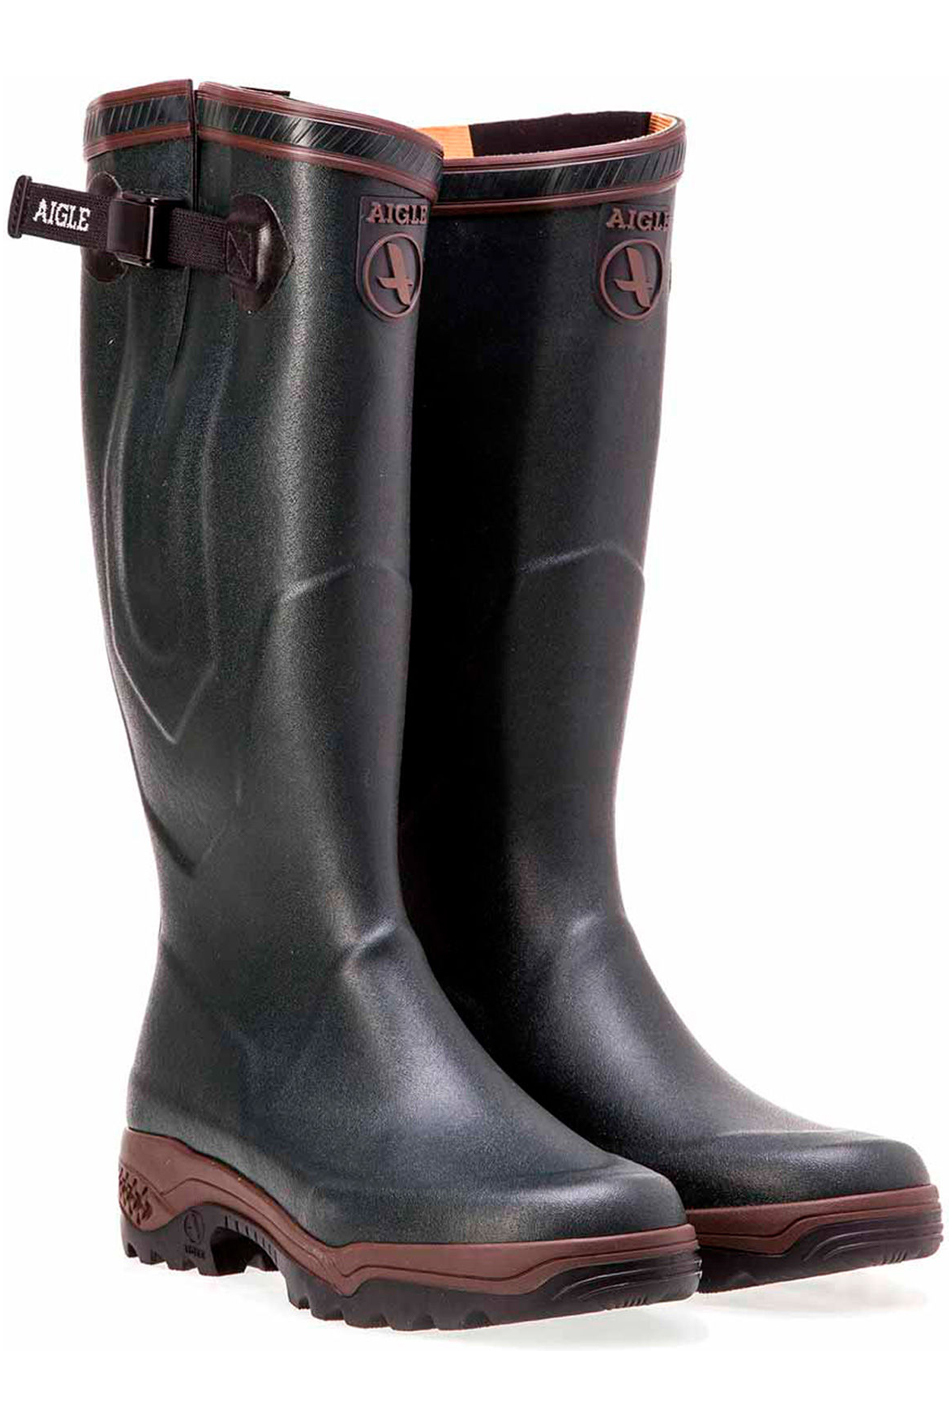 Aigle Mens Boots Parcours 2 ISO Vario Hunting Bronze | Equestrian | Boots | The Drillshed